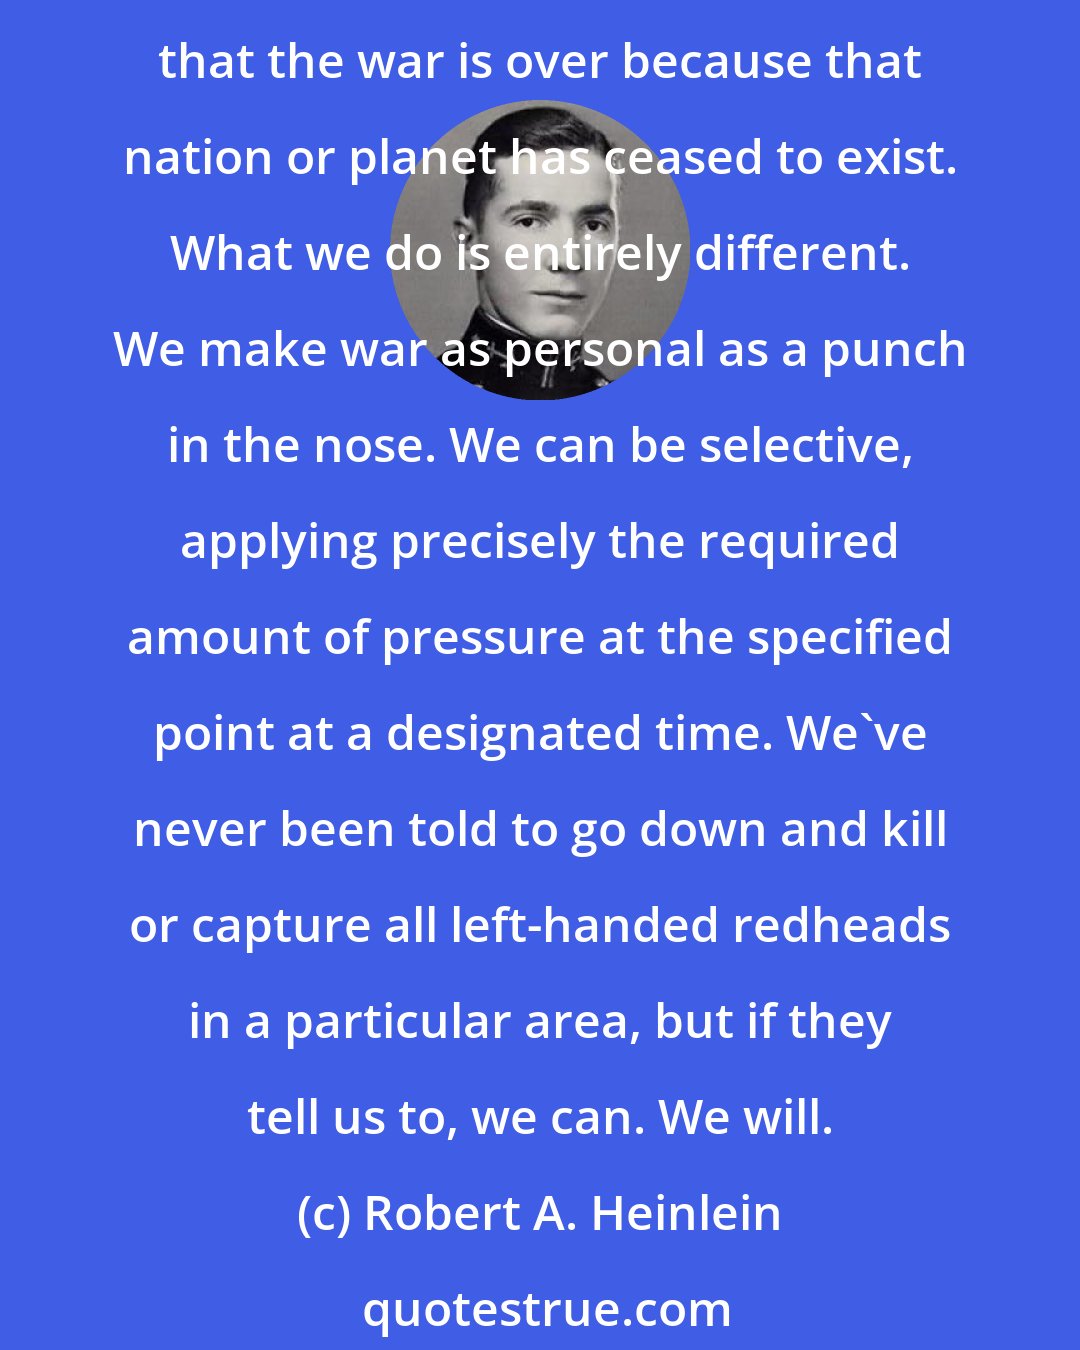 Robert A. Heinlein: There are a dozen different ways of delivering destruction in impersonal wholesale, via ships or missiles of one sort or another, catastrophes so widespread, so unselective that the war is over because that nation or planet has ceased to exist. What we do is entirely different. We make war as personal as a punch in the nose. We can be selective, applying precisely the required amount of pressure at the specified point at a designated time. We've never been told to go down and kill or capture all left-handed redheads in a particular area, but if they tell us to, we can. We will.